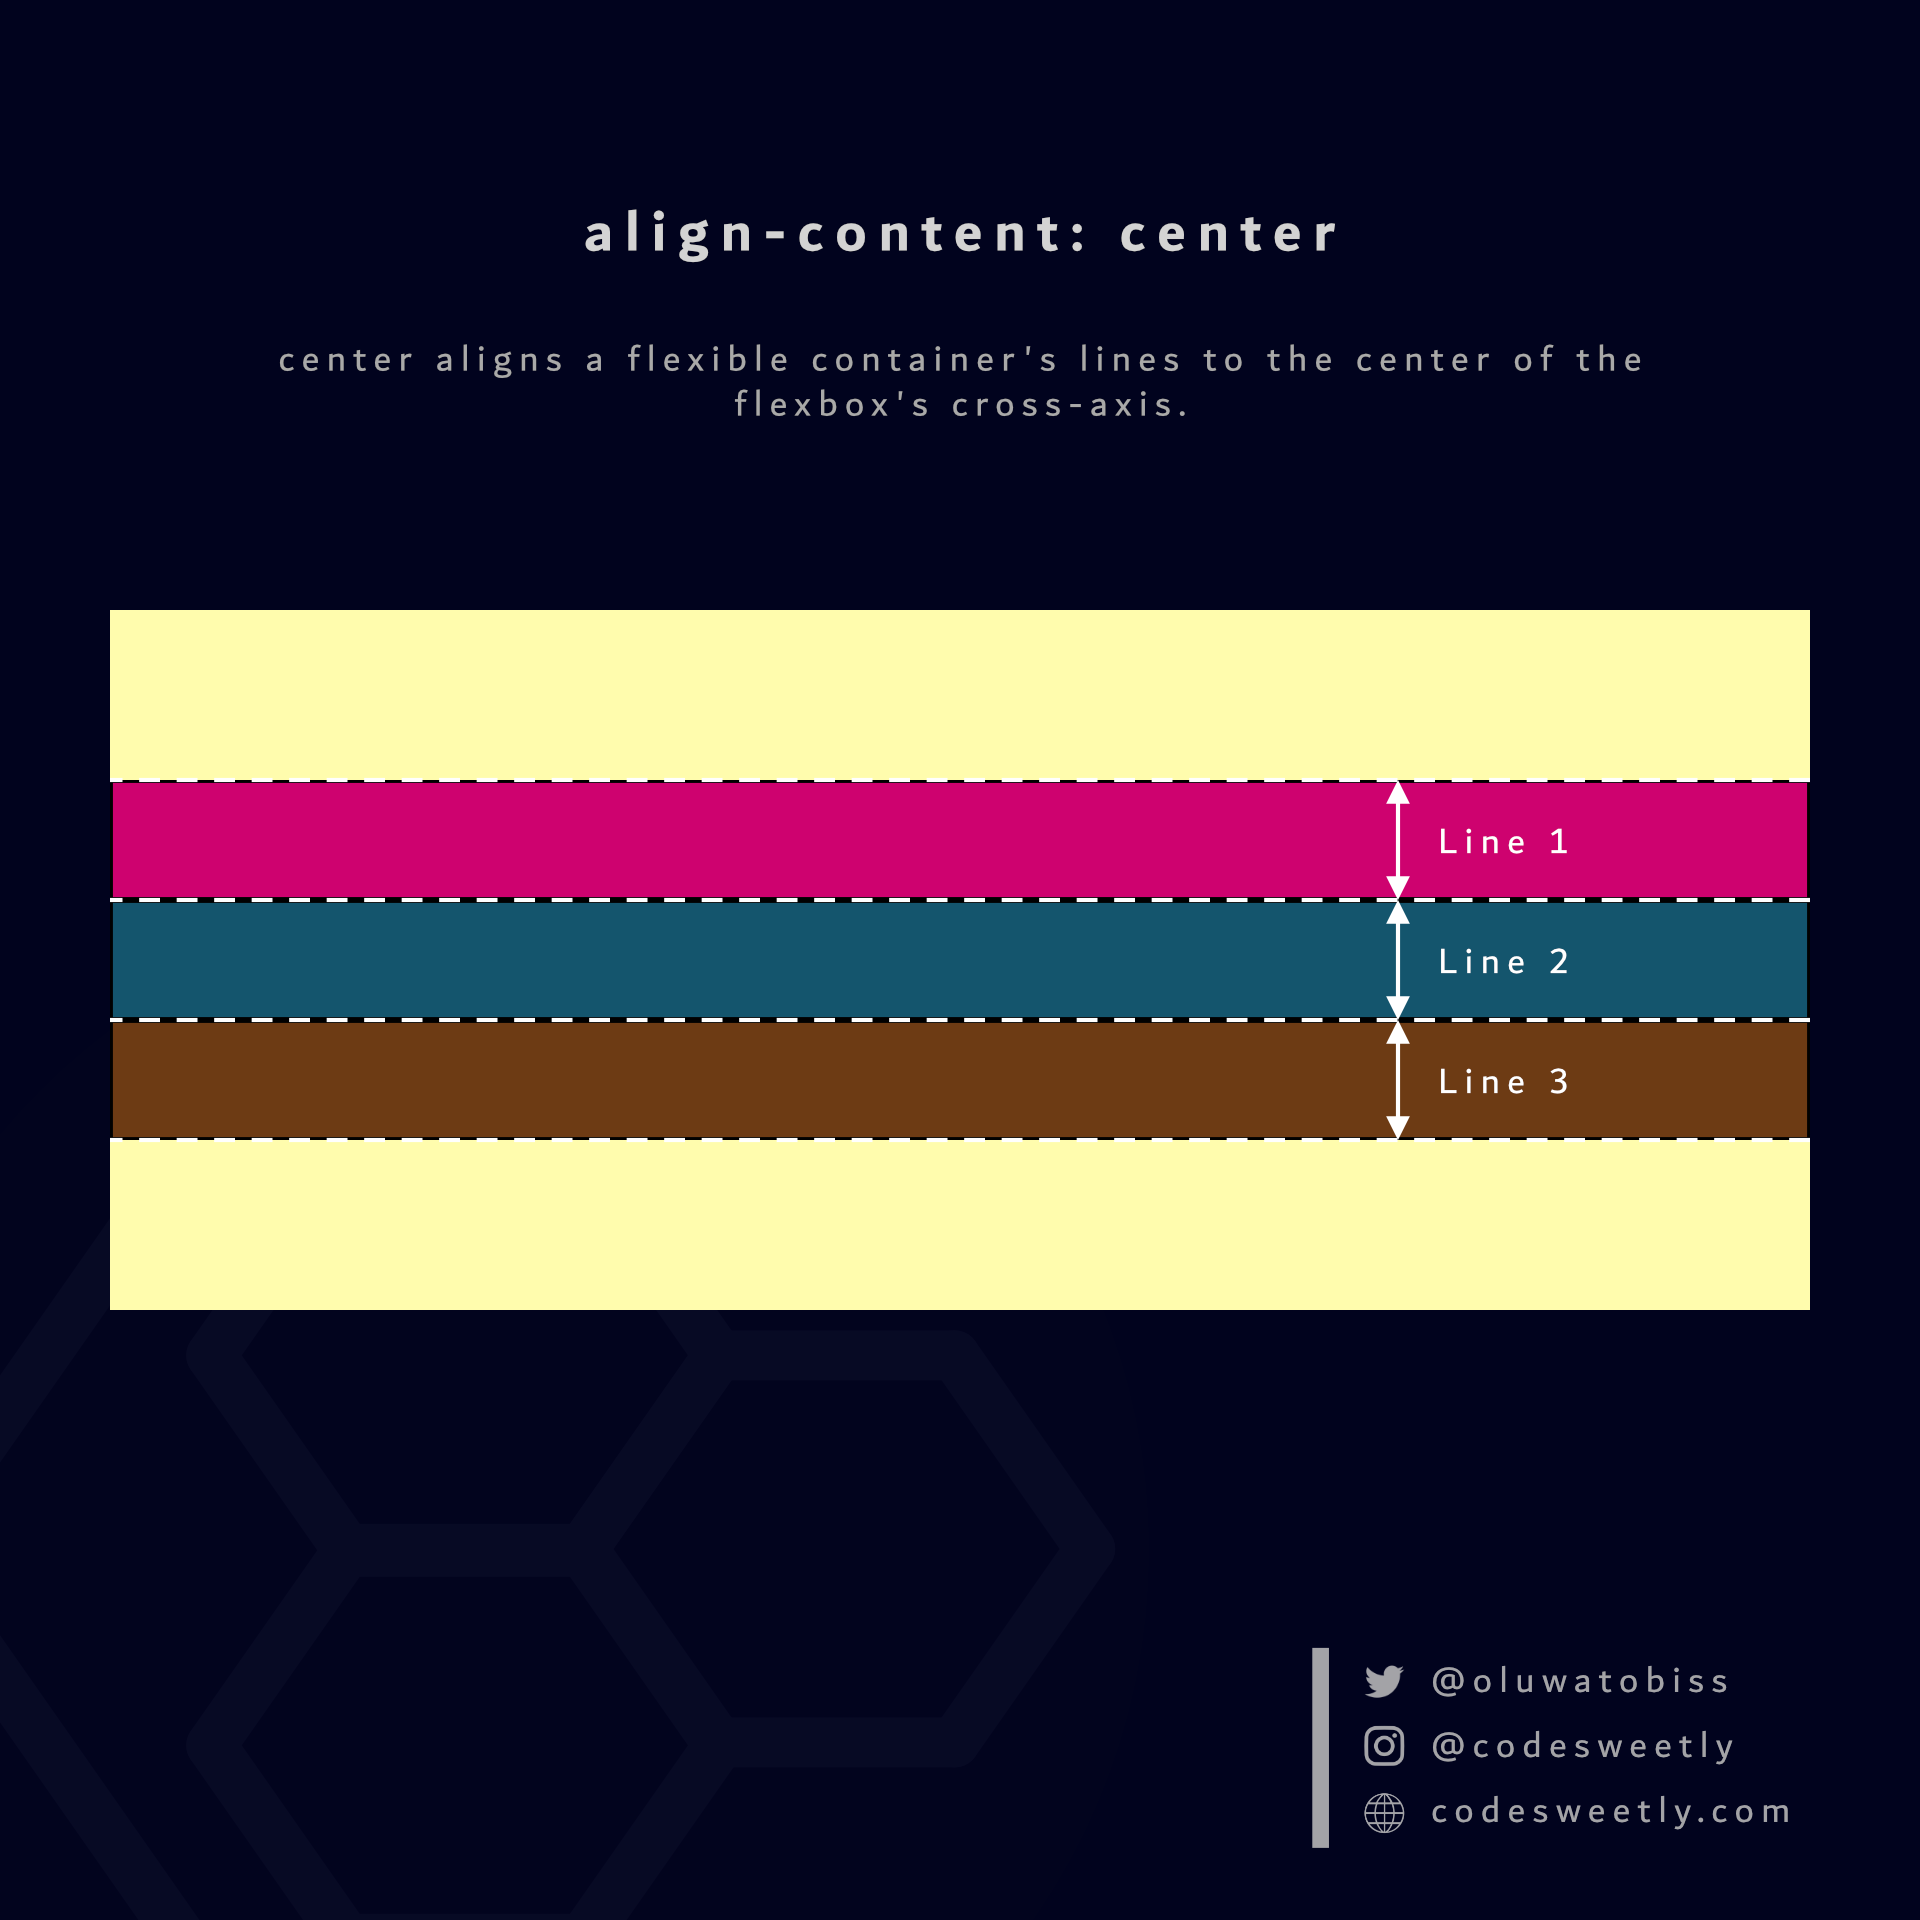 align-content center value aligns flexbox's lines to the center of the container's cross-axis